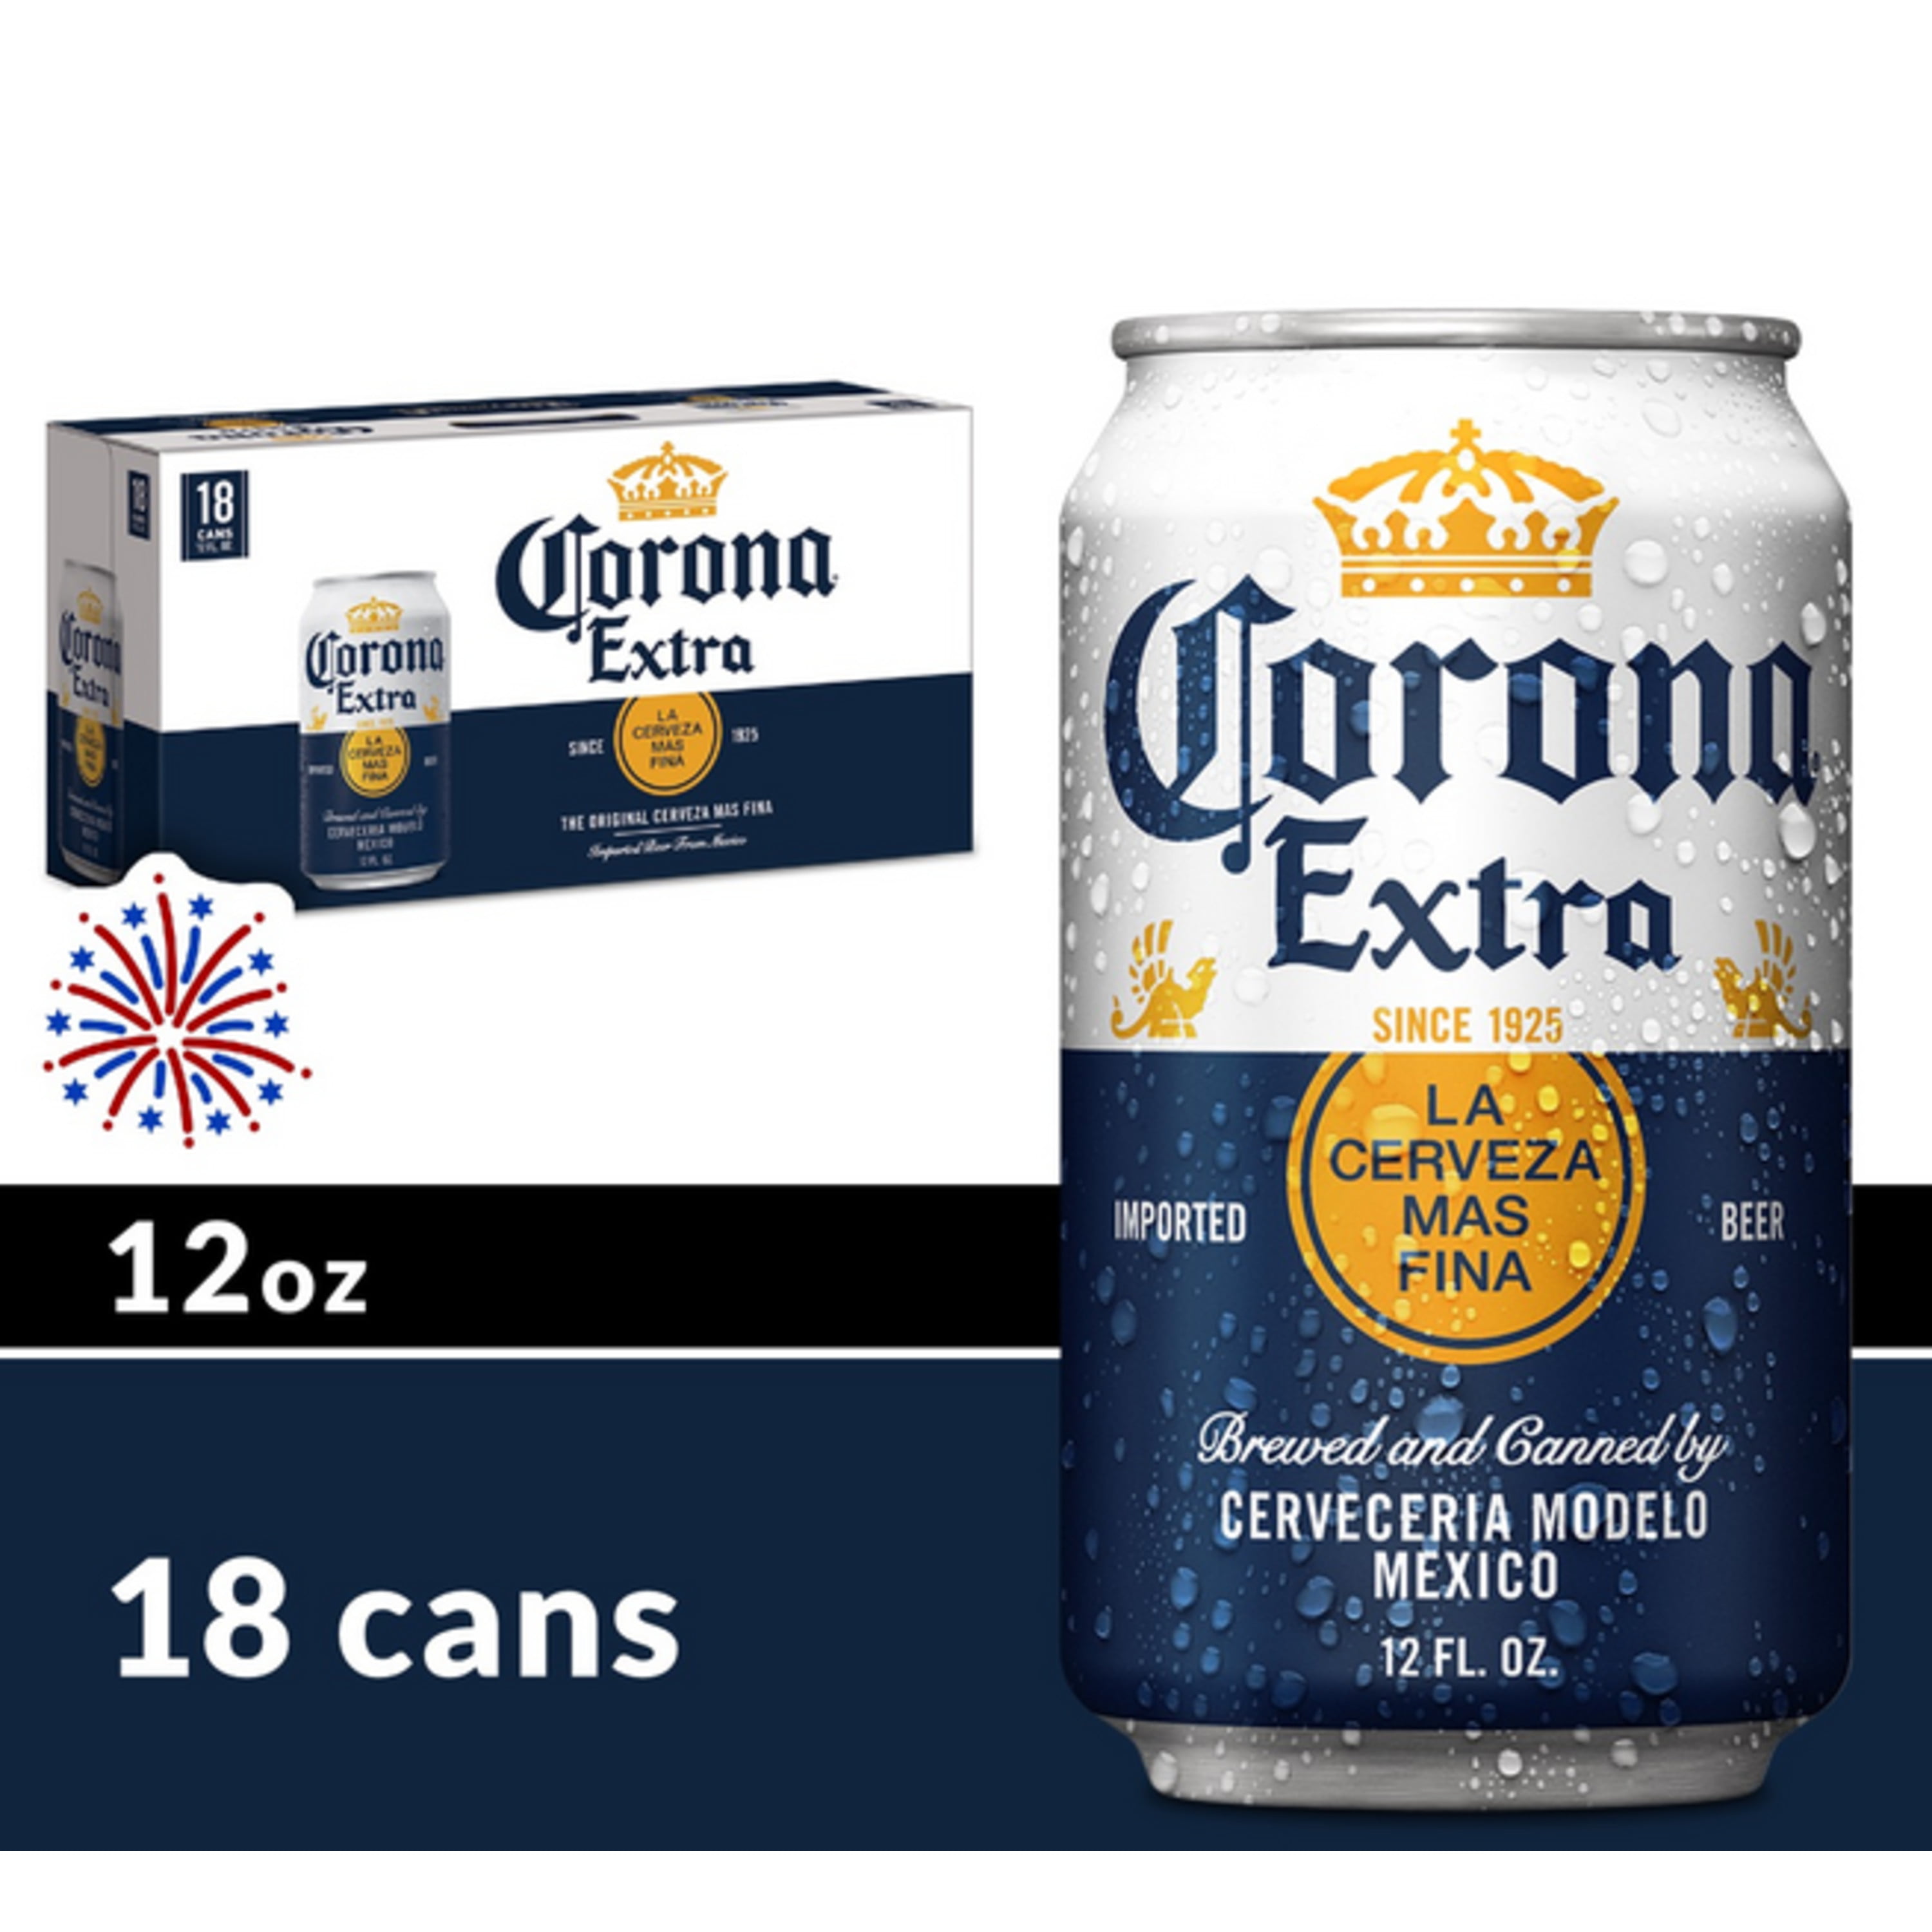 Corona Extra Mexican Lager Beer, 18 pk 12 fl oz Cans, 4.6% ABV ...